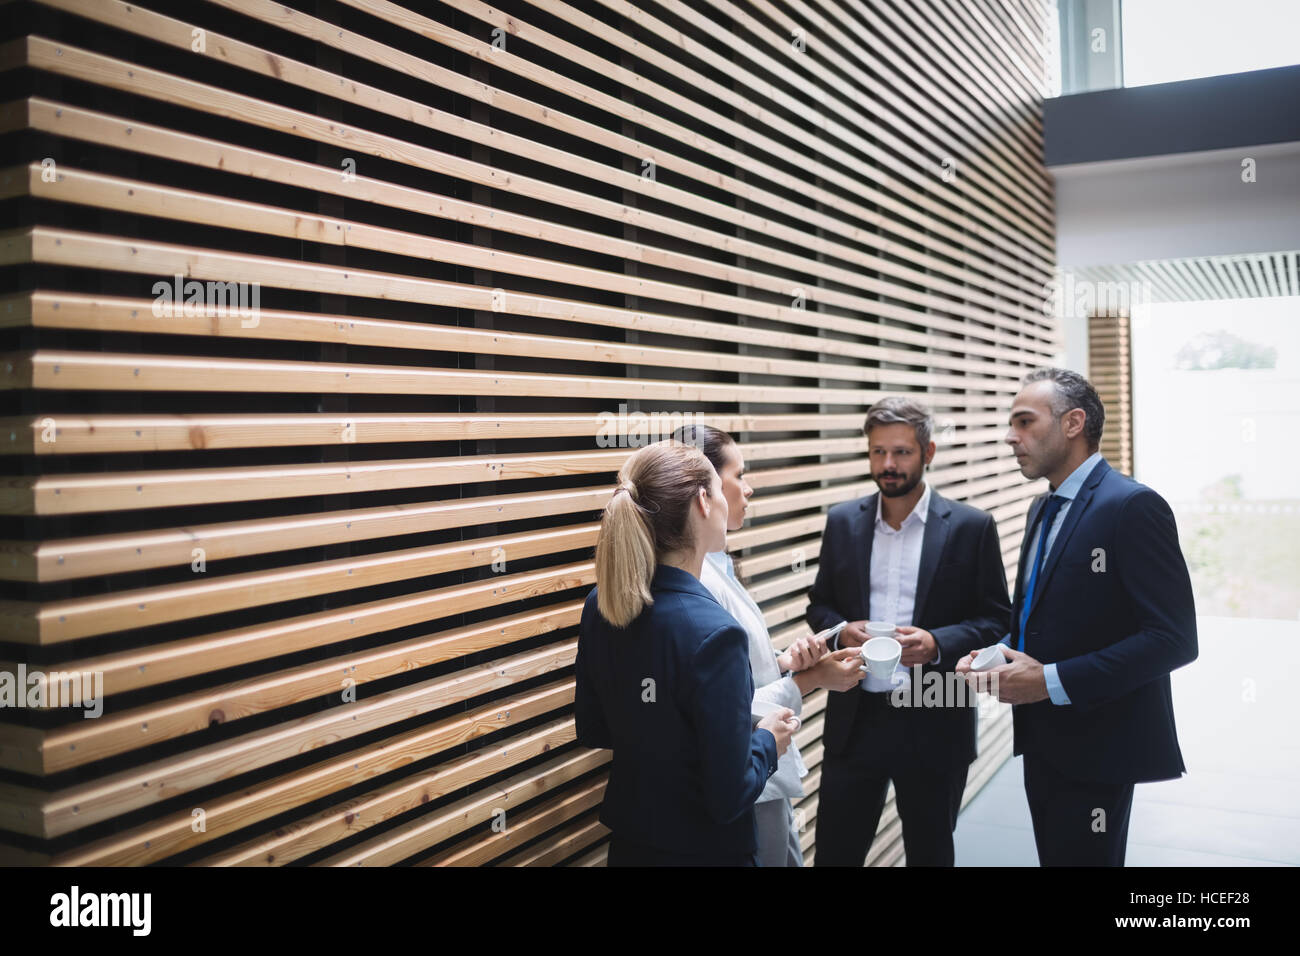 Businesspeople having a discussion during breaktime Stock Photo